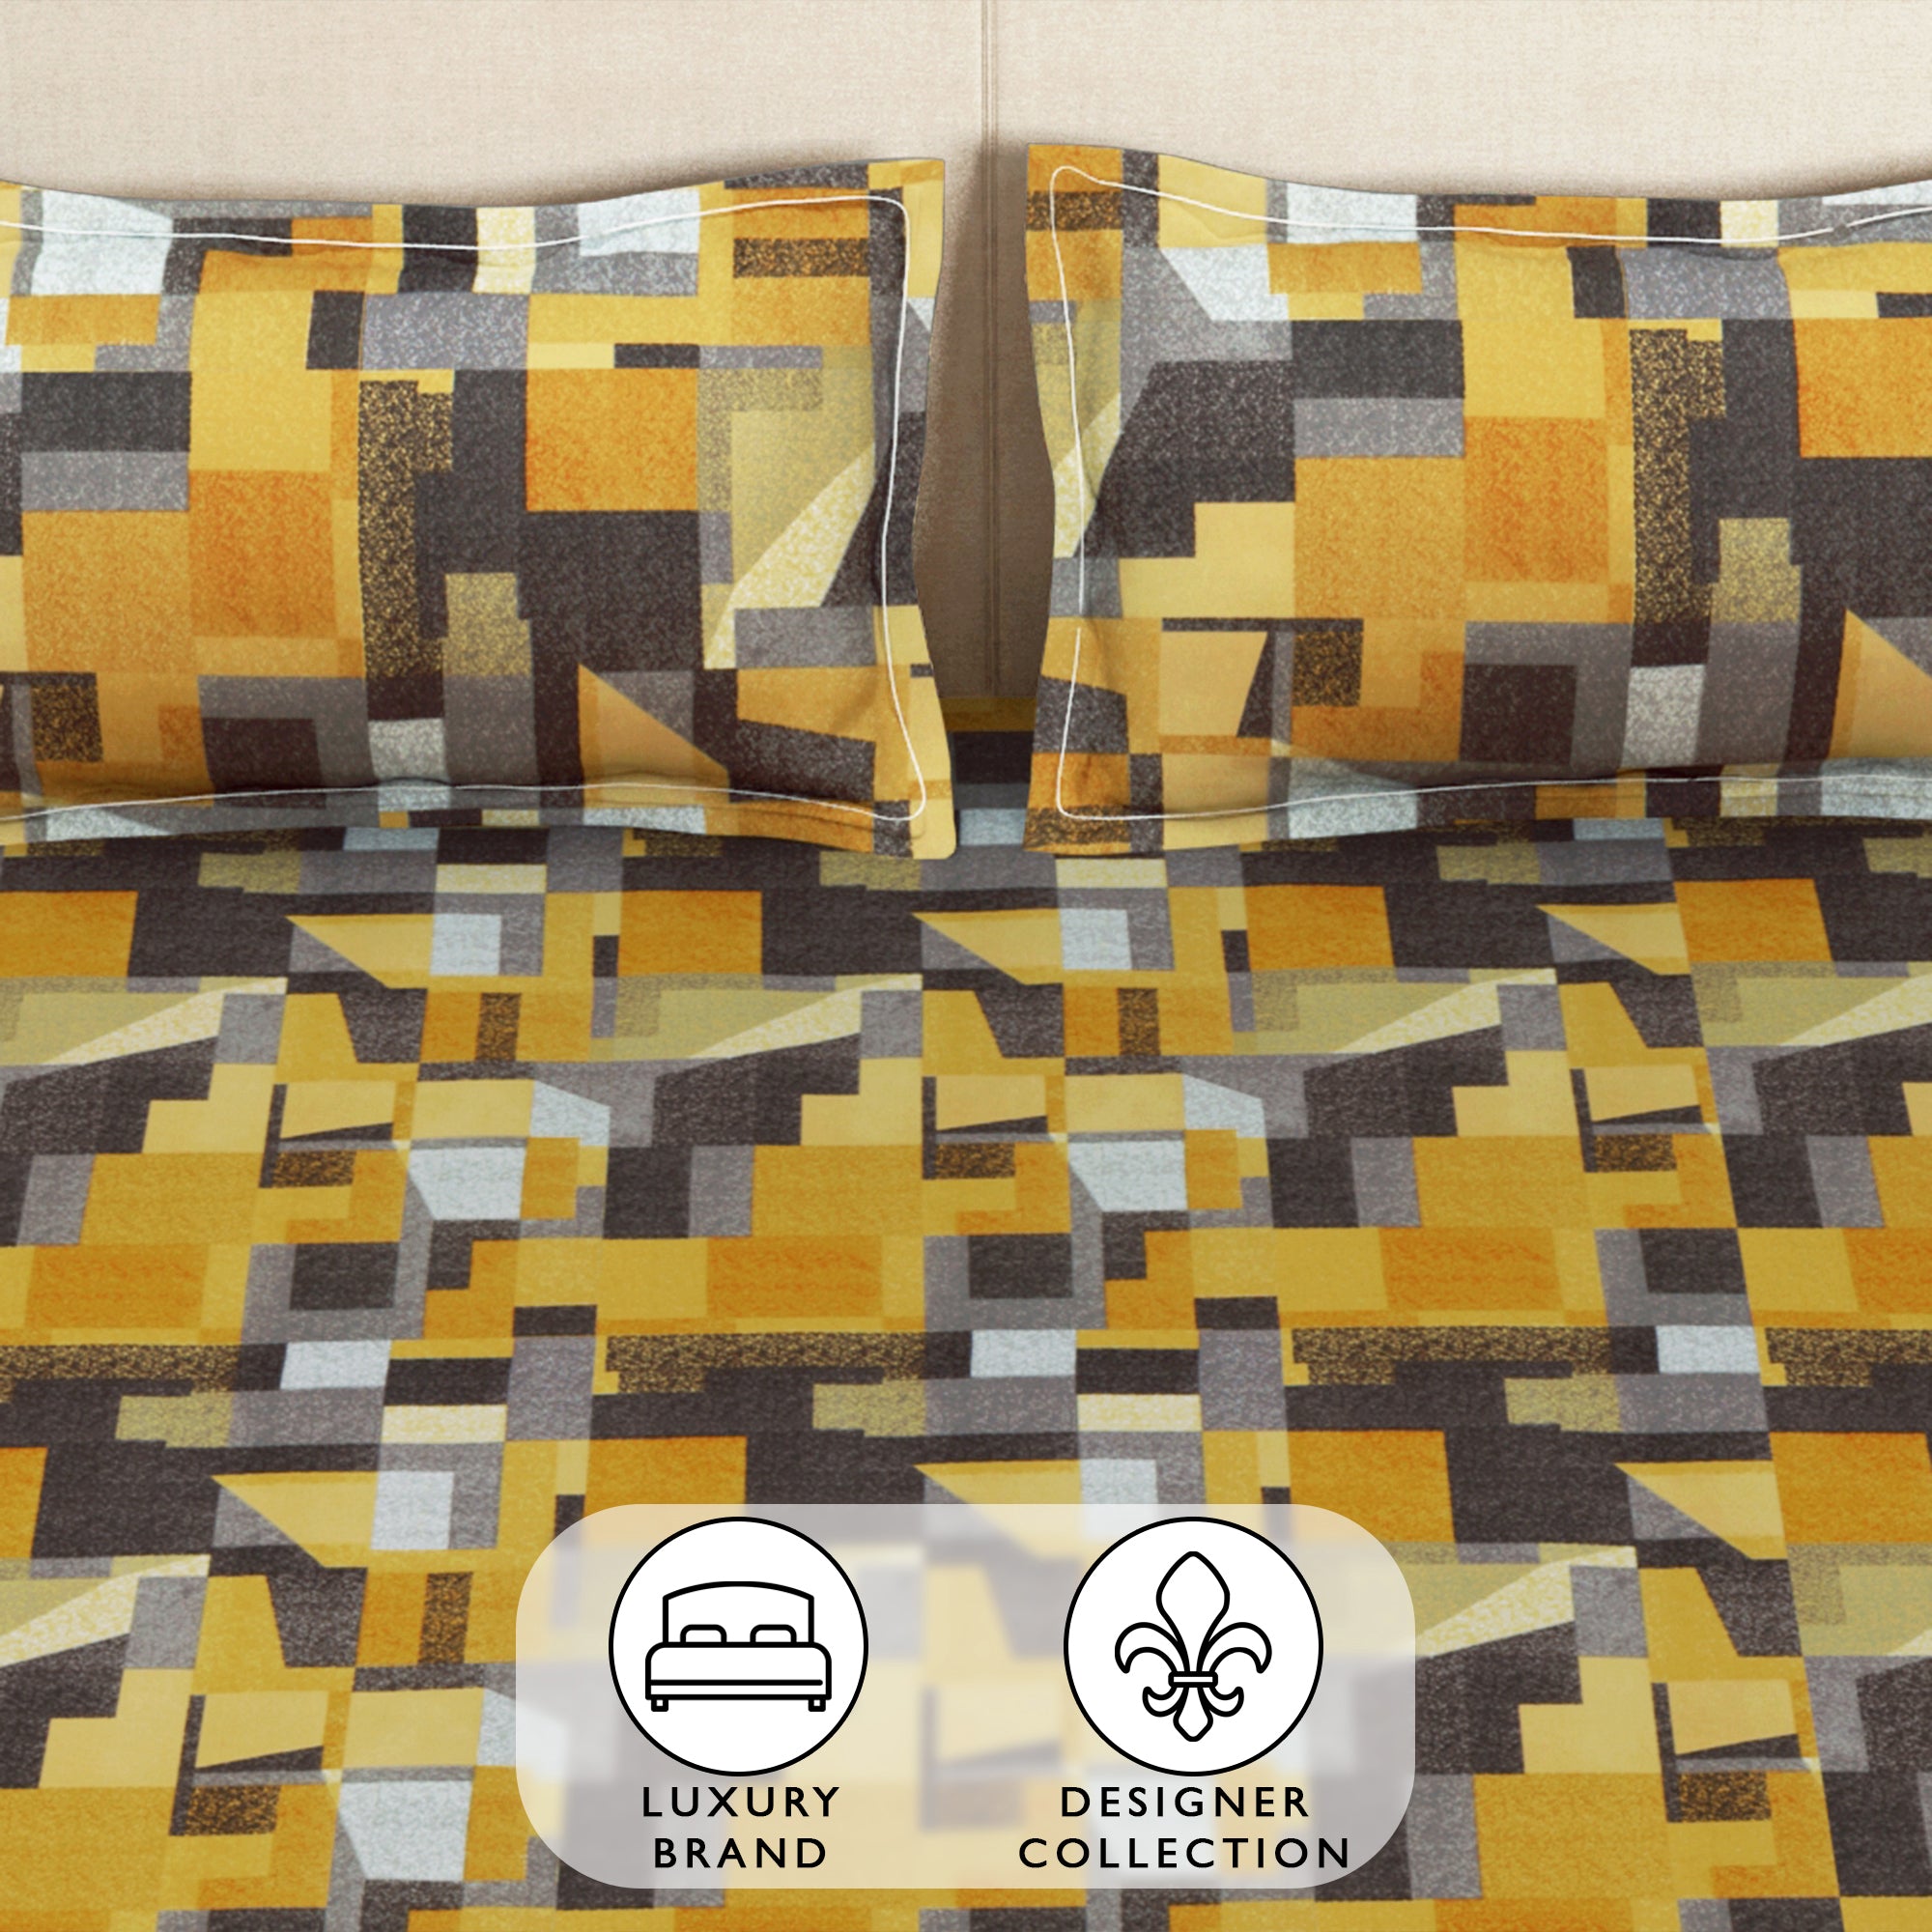 Arena 186 TC Mustard Double Size Bedsheet With 2 Pillow Cover